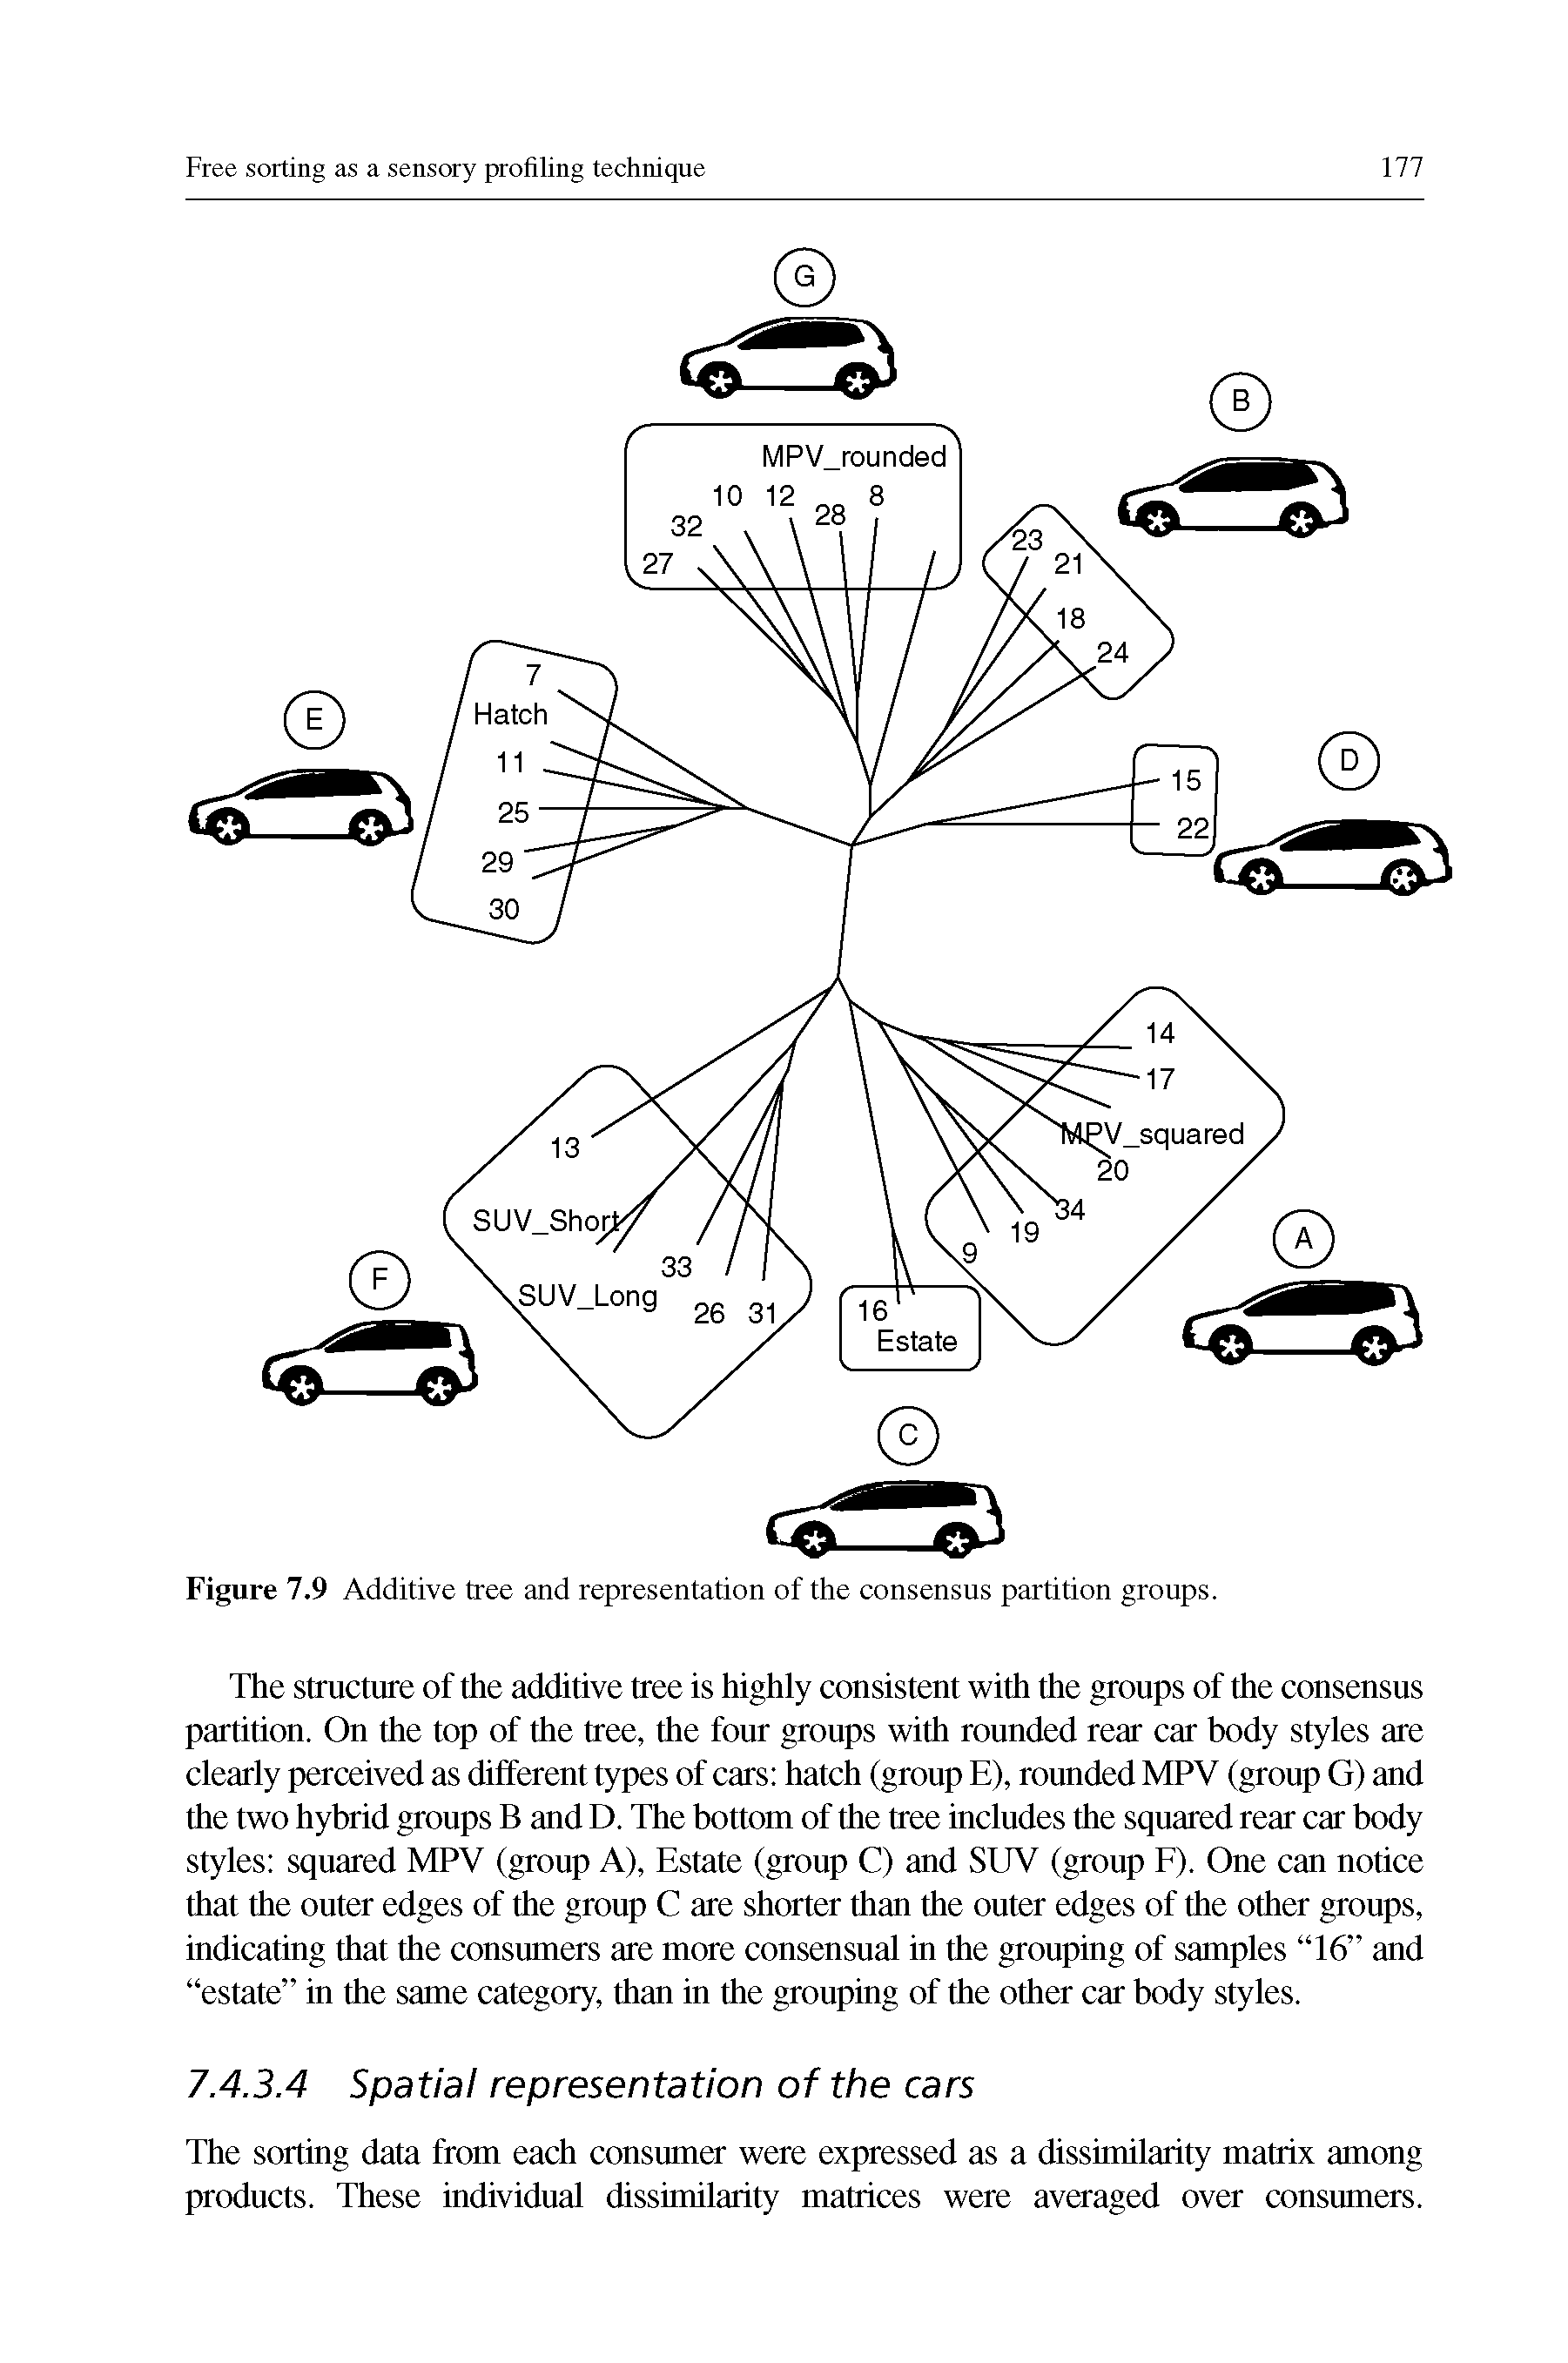 Figure 7.9 Additive tree and representation of the consensus partition groups.